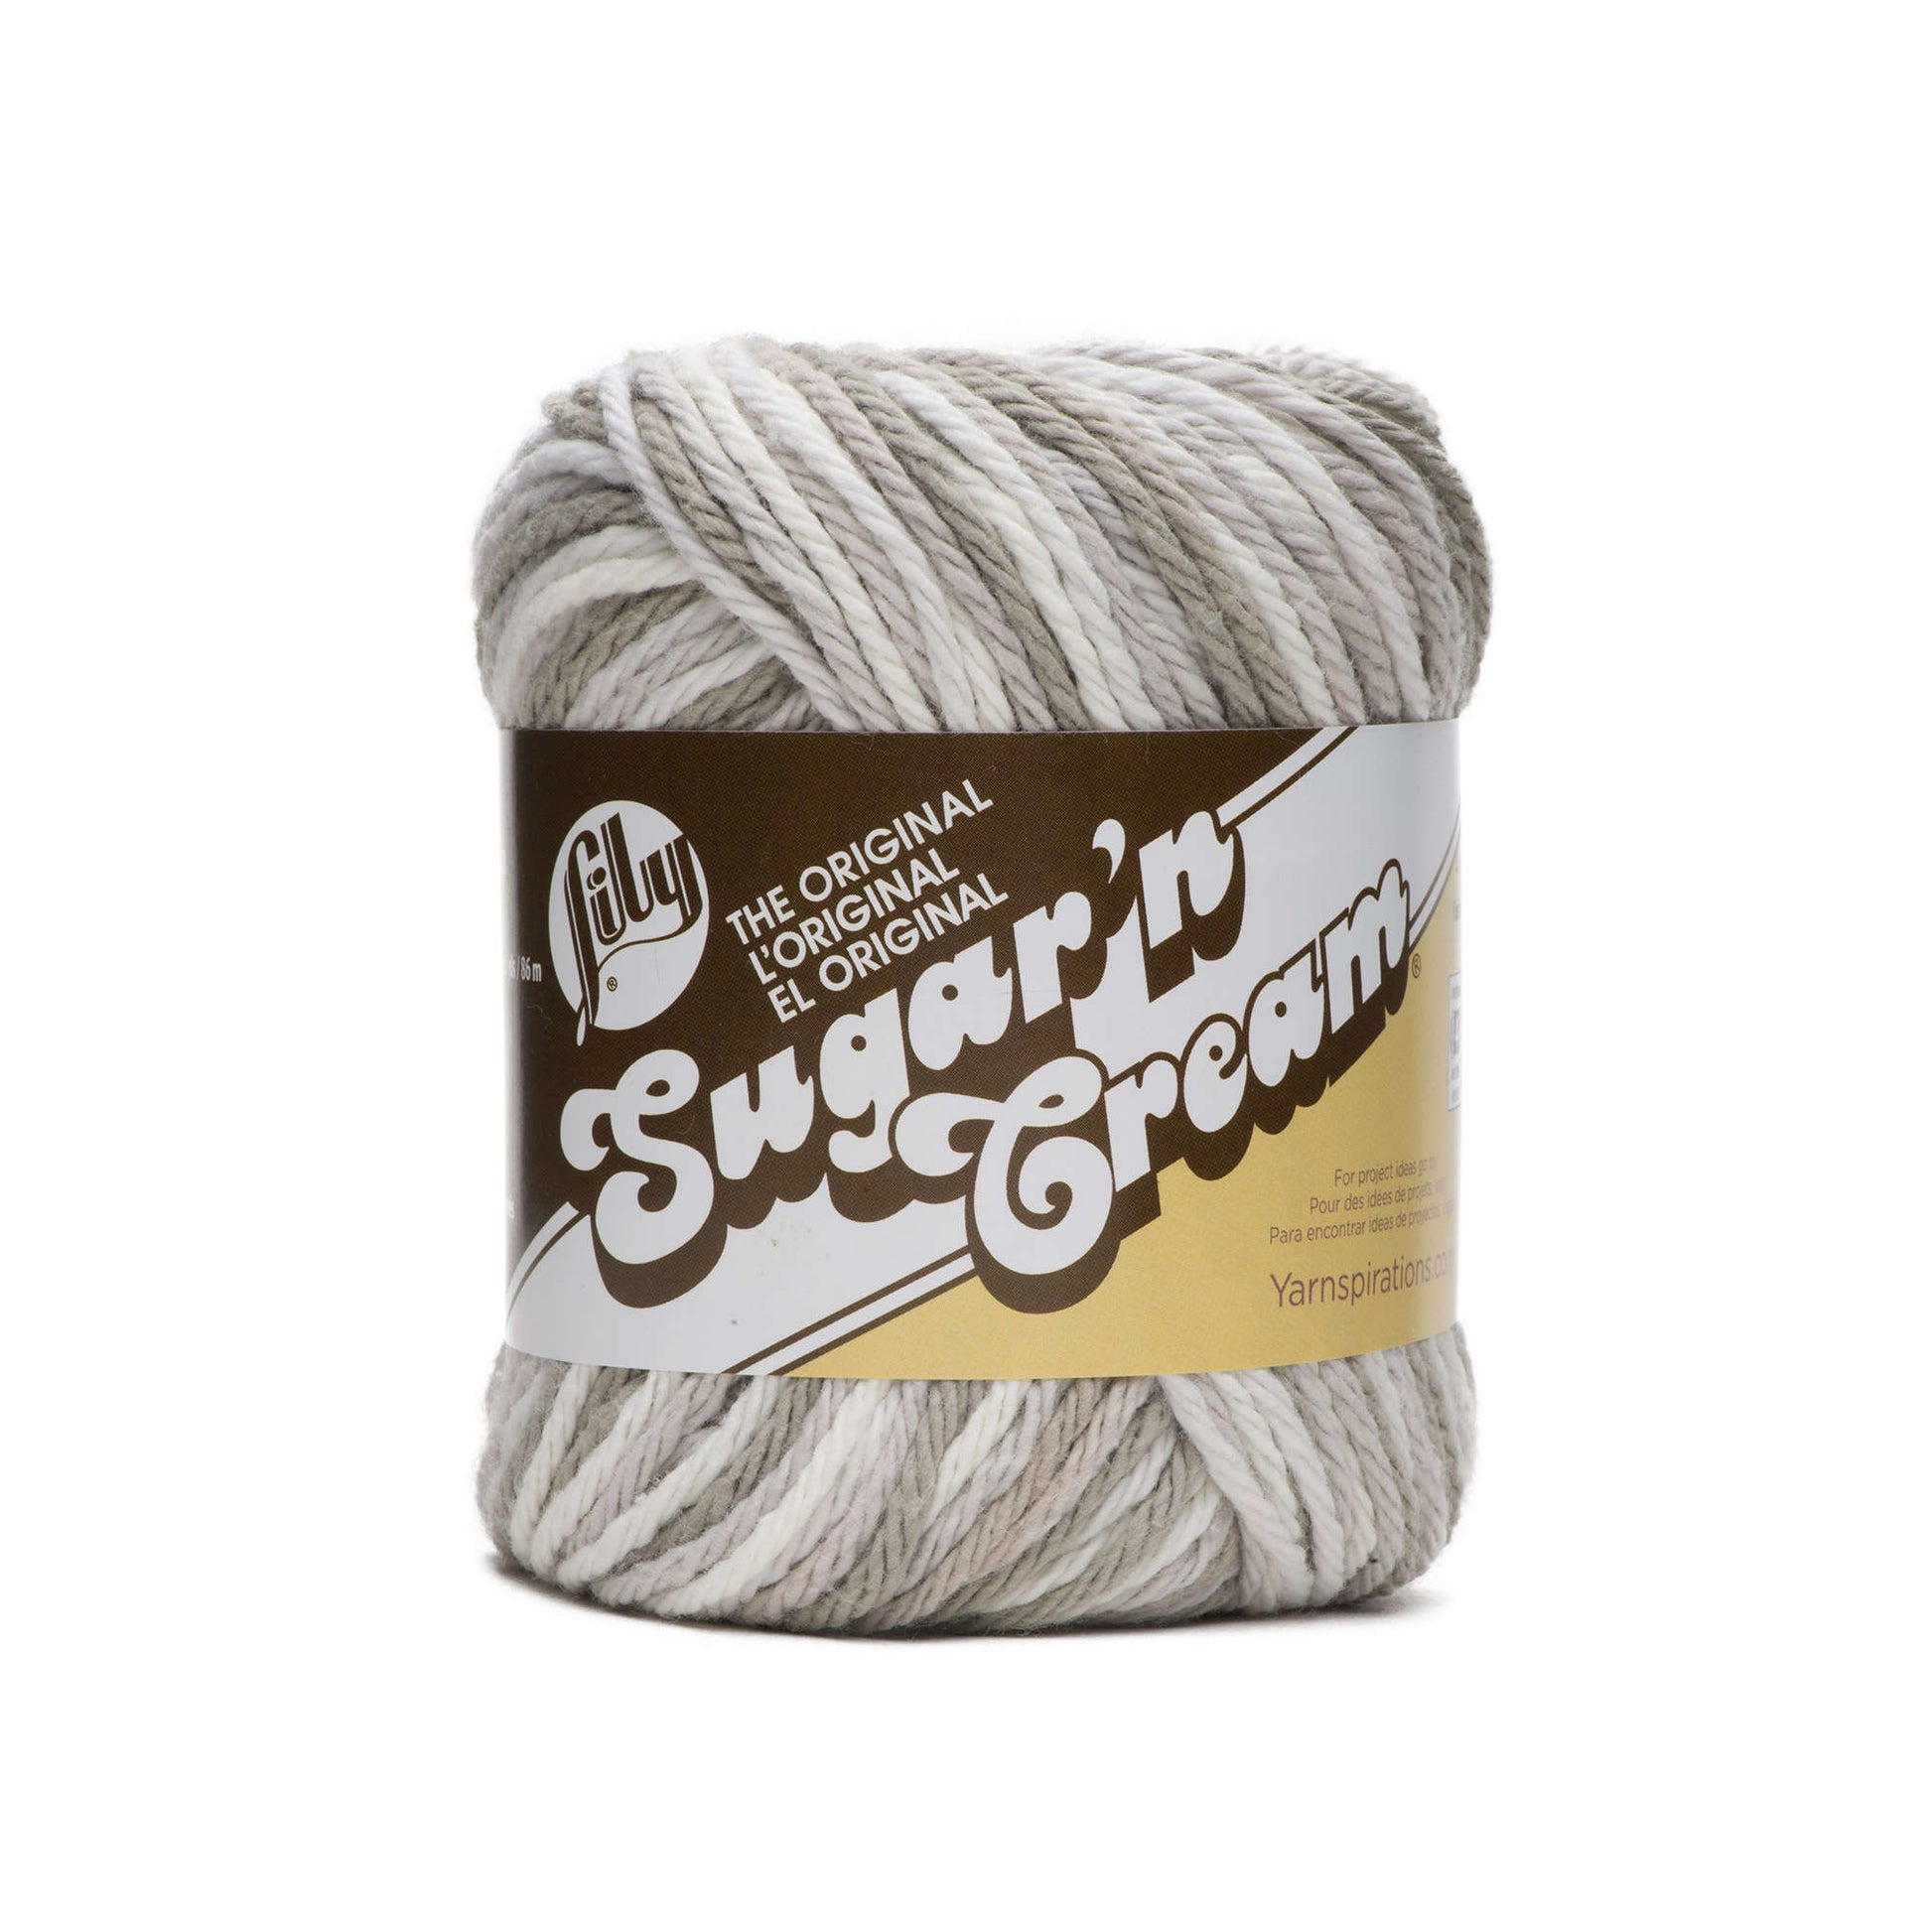 Lily Sugar'n Cream Ombres Yarn Greige Ombre